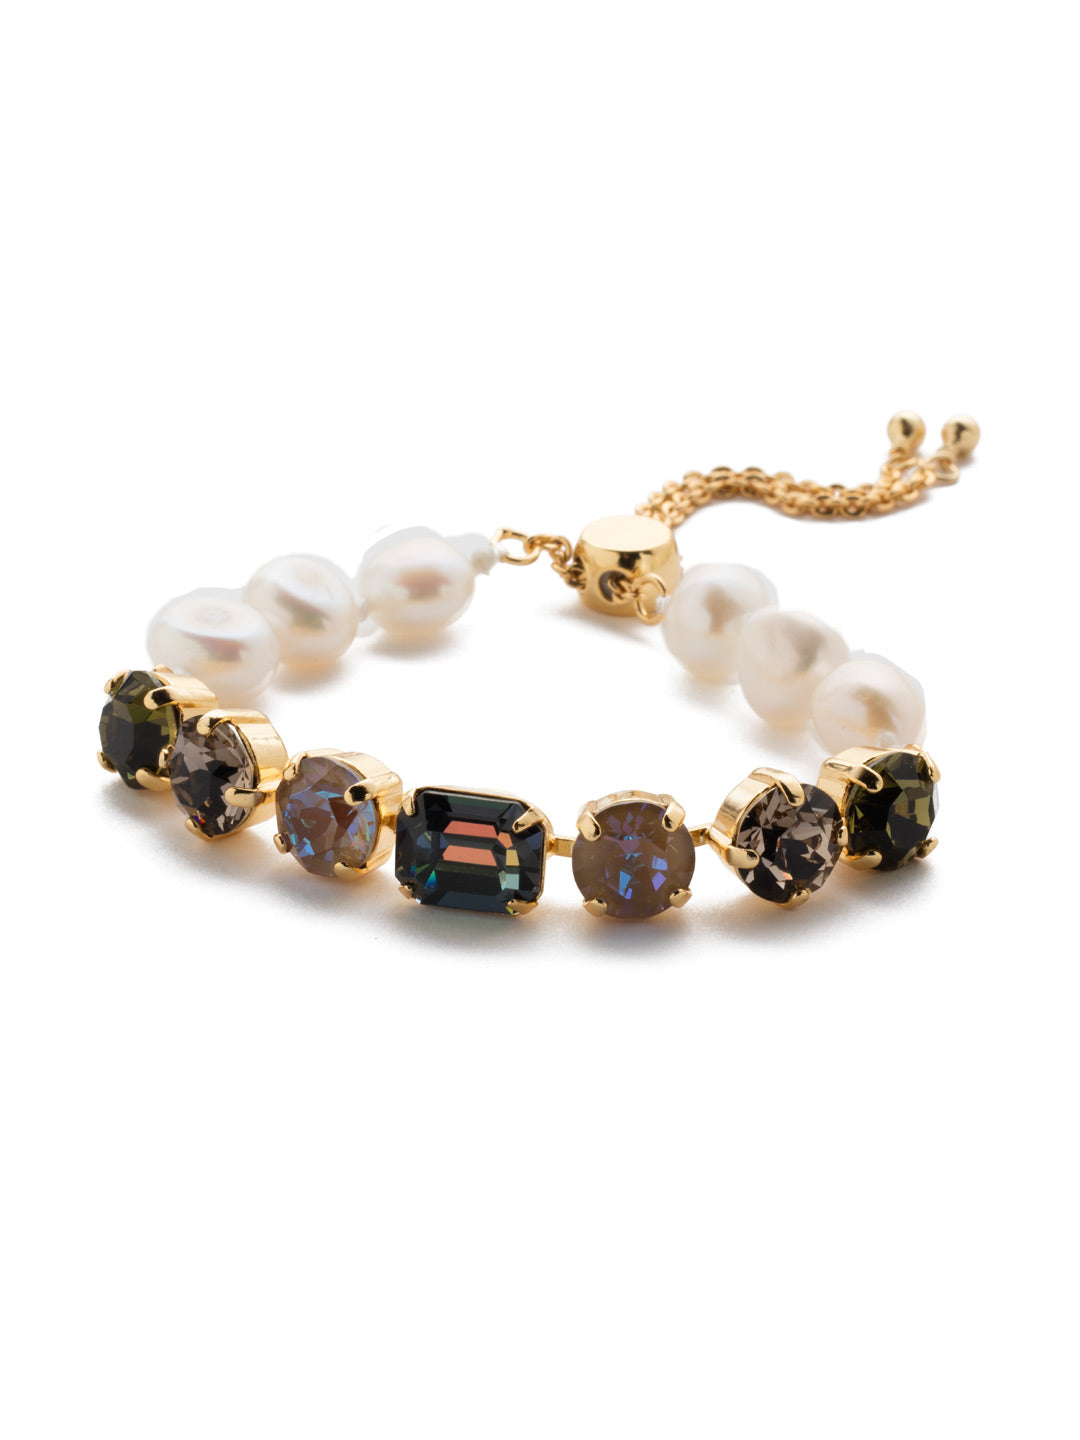 Cadenza Slider Bracelet - BEC14BGCSM - A classic line bracelet reimagined with a adjustable slider clasp. A pattern of crystals and pearls give this bracelet all around allure. From Sorrelli's Cashmere collection in our Bright Gold-tone finish.